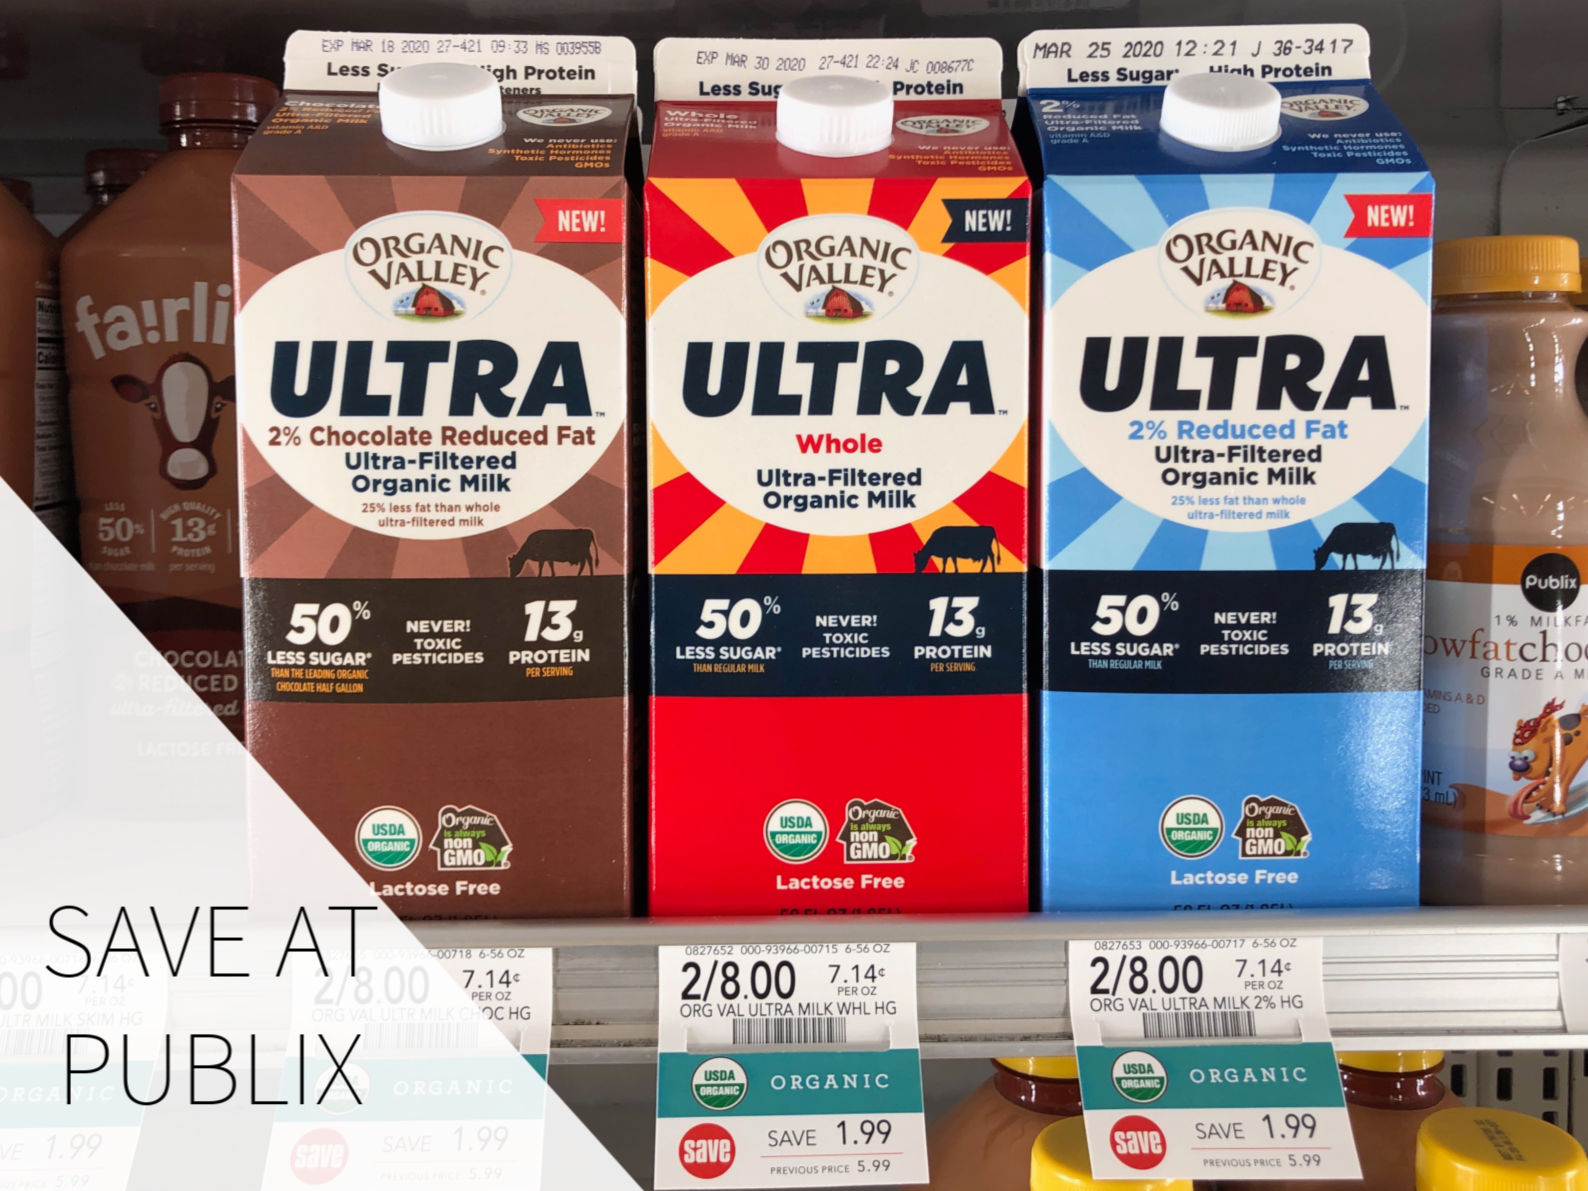 Delicious Organic Valley ULTRA Is On Sale NOW At Publix - More Protein And Less Sugar With All The Great Taste! on I Heart Publix